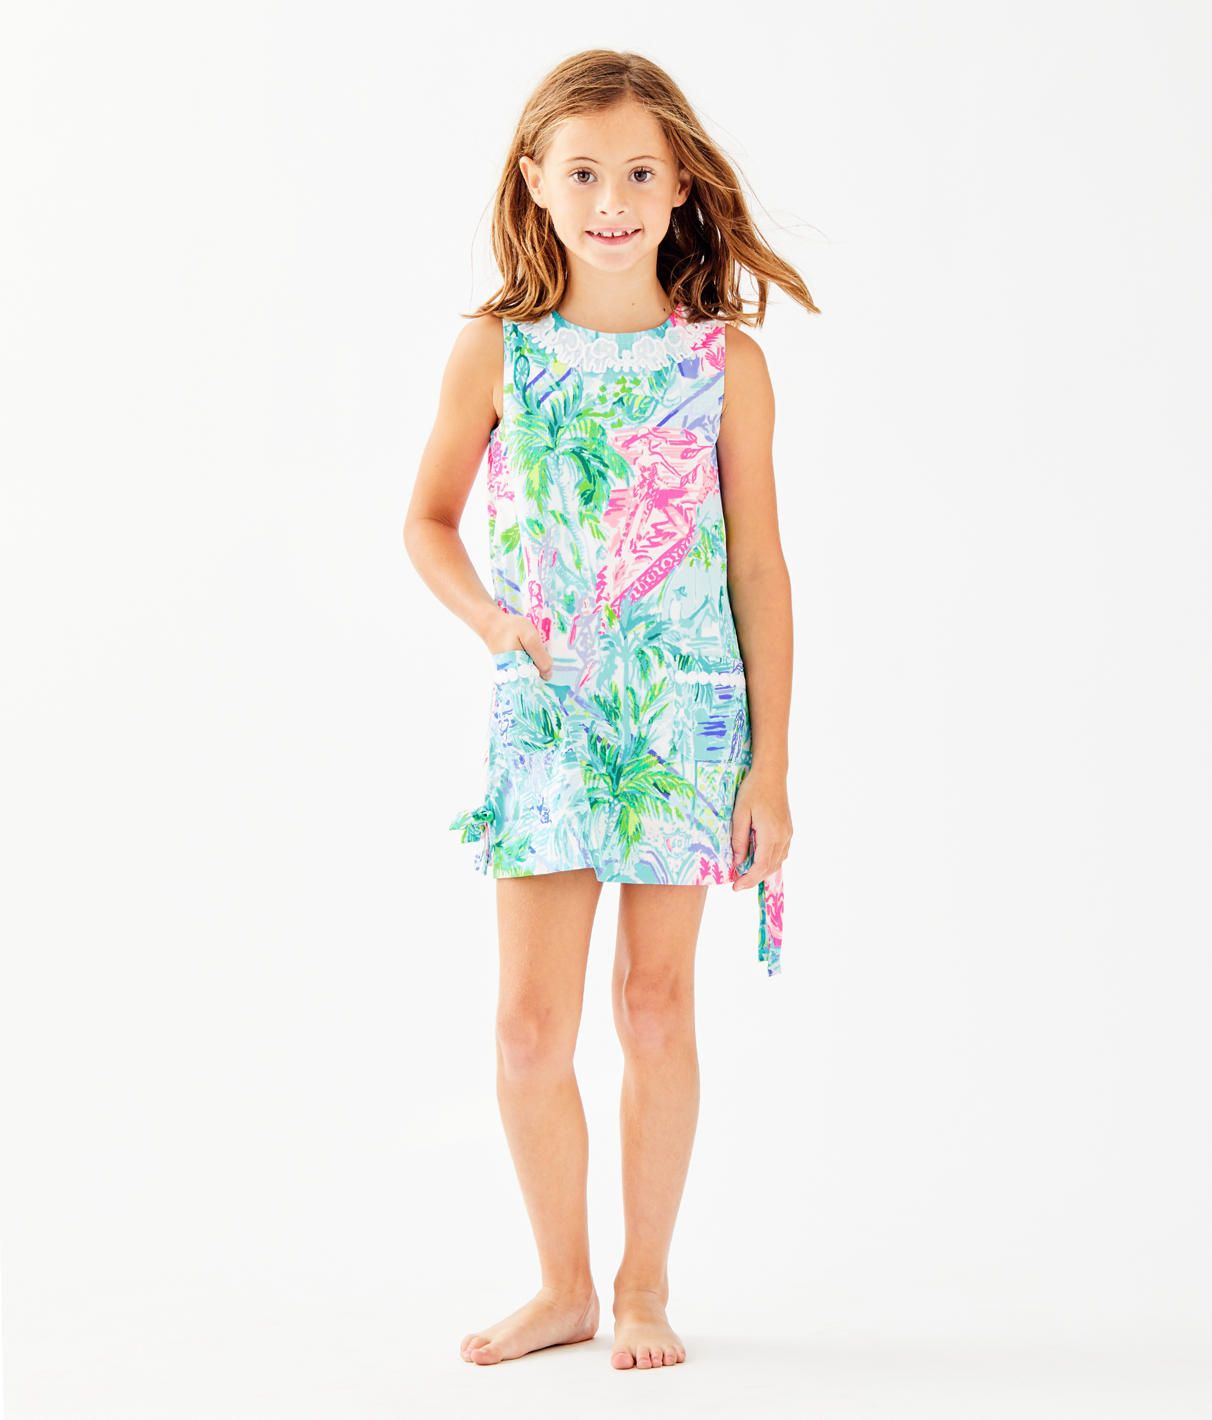 Lilly Pulitzer Girls Little Lilly Classic Shift Dress | Lilly Pulitzer